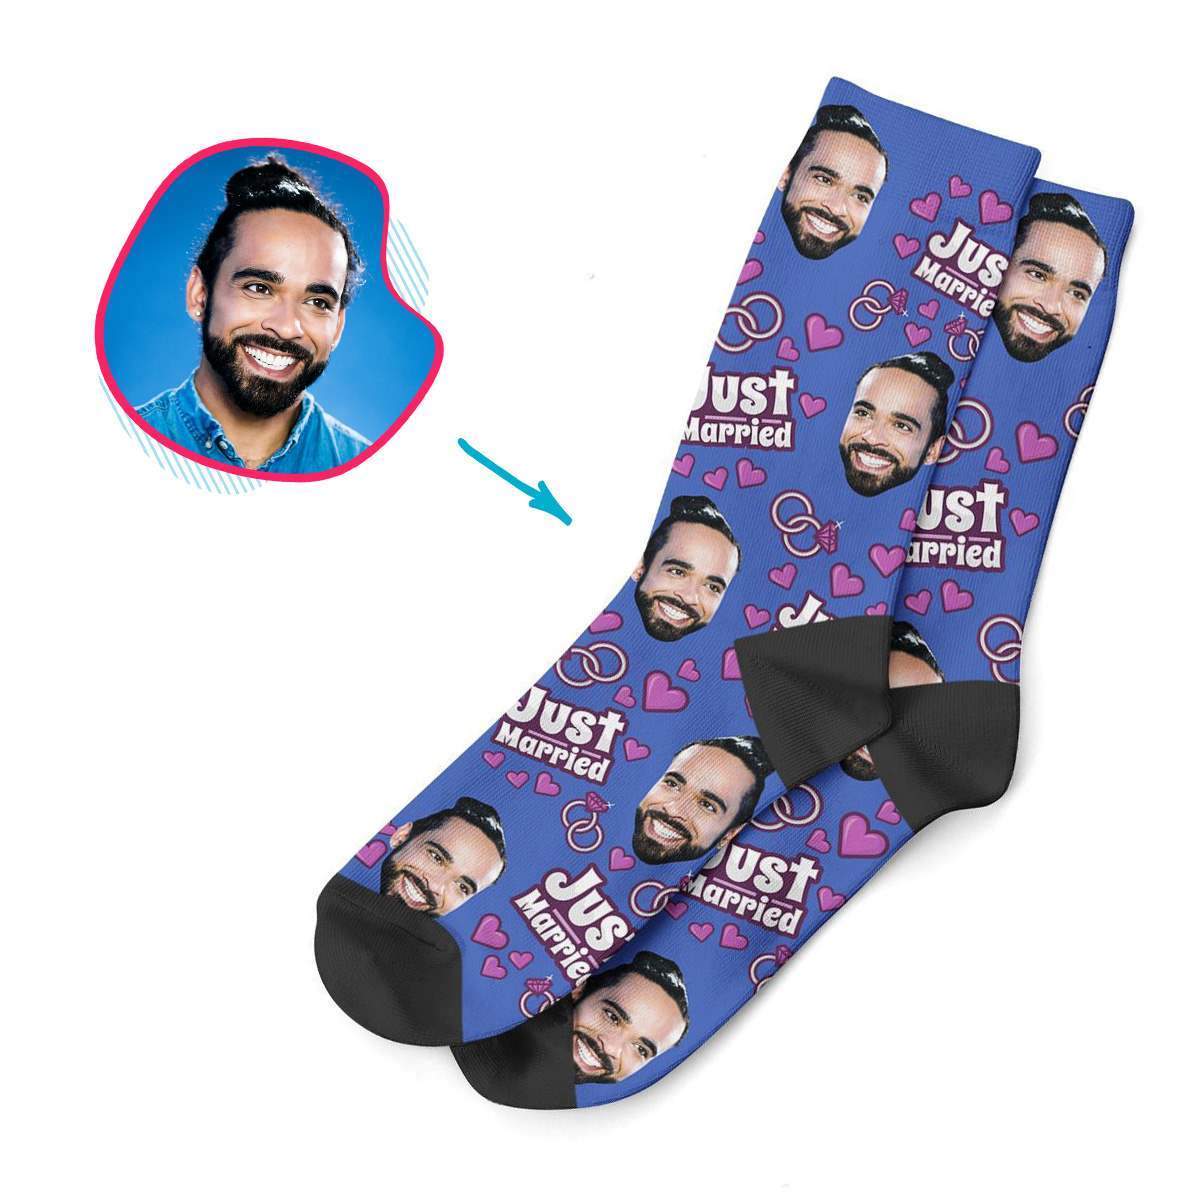 darkblue Just Married socks personalized with photo of face printed on them